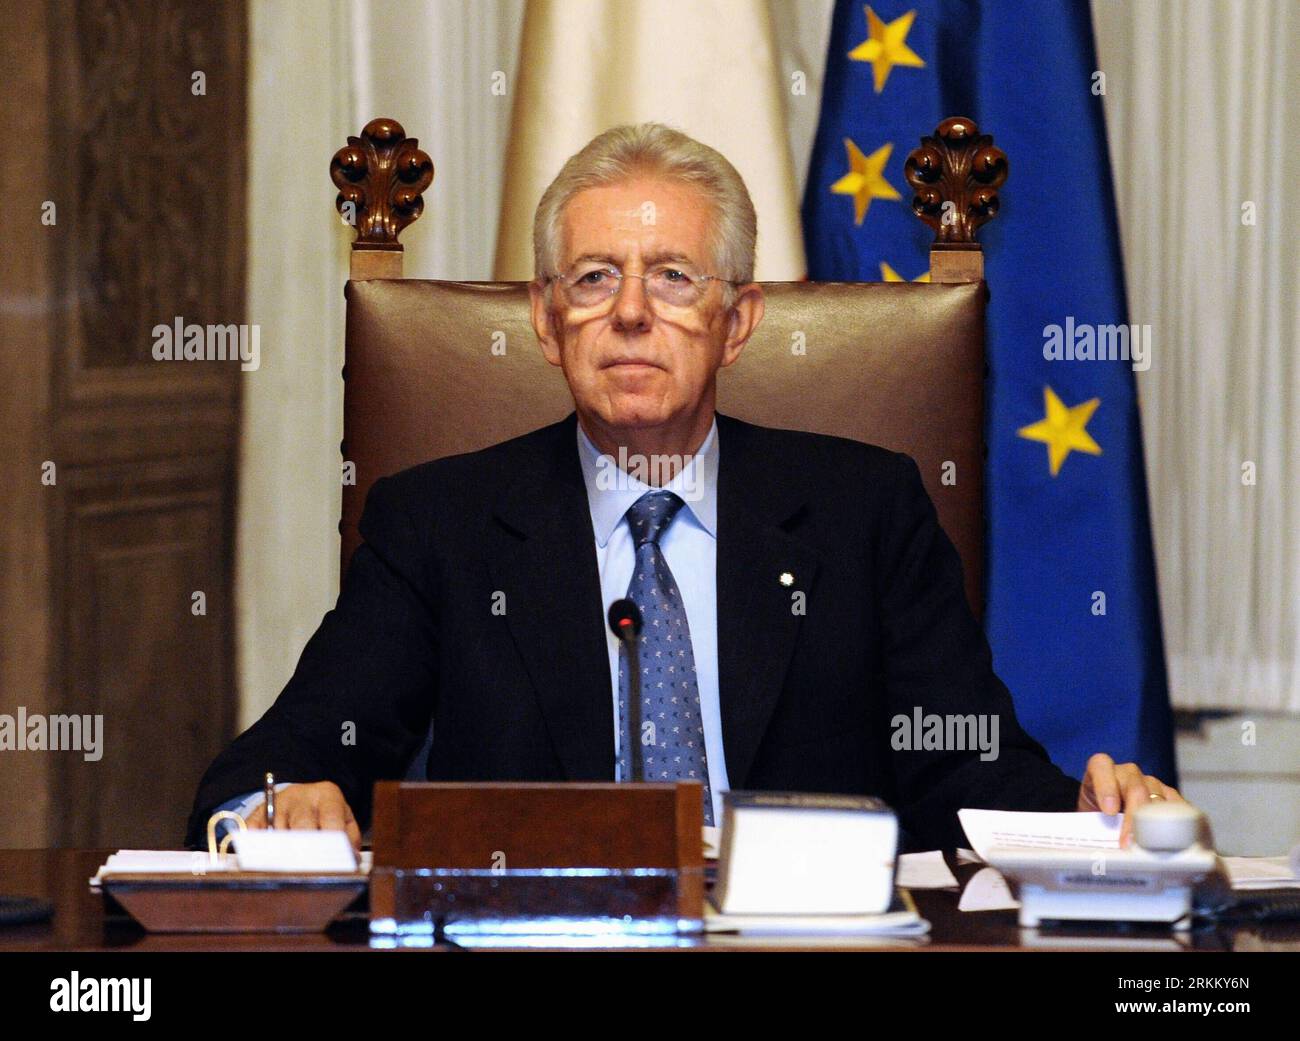 (111116) -- ROME, Nov. 16, 2011 (Xinhua) -- Italy s new prime minister Mario Monti takes office at the Chigi Palace in Rome, Italy, Nov. 16, 2011. Mario Monti on Wednesday took over as Italian new prime minister and led the newly selected cabinet ministers to be sworn in at the presidential palace, a symbol of starting their task for drawing off a heavy debt-driven financial crisis. (Xinhua/Alberto Lingria) ITALY-ROME-MONTI-BERLUSCONI-POWER HANDOVER PUBLICATIONxNOTxINxCHN Stock Photo